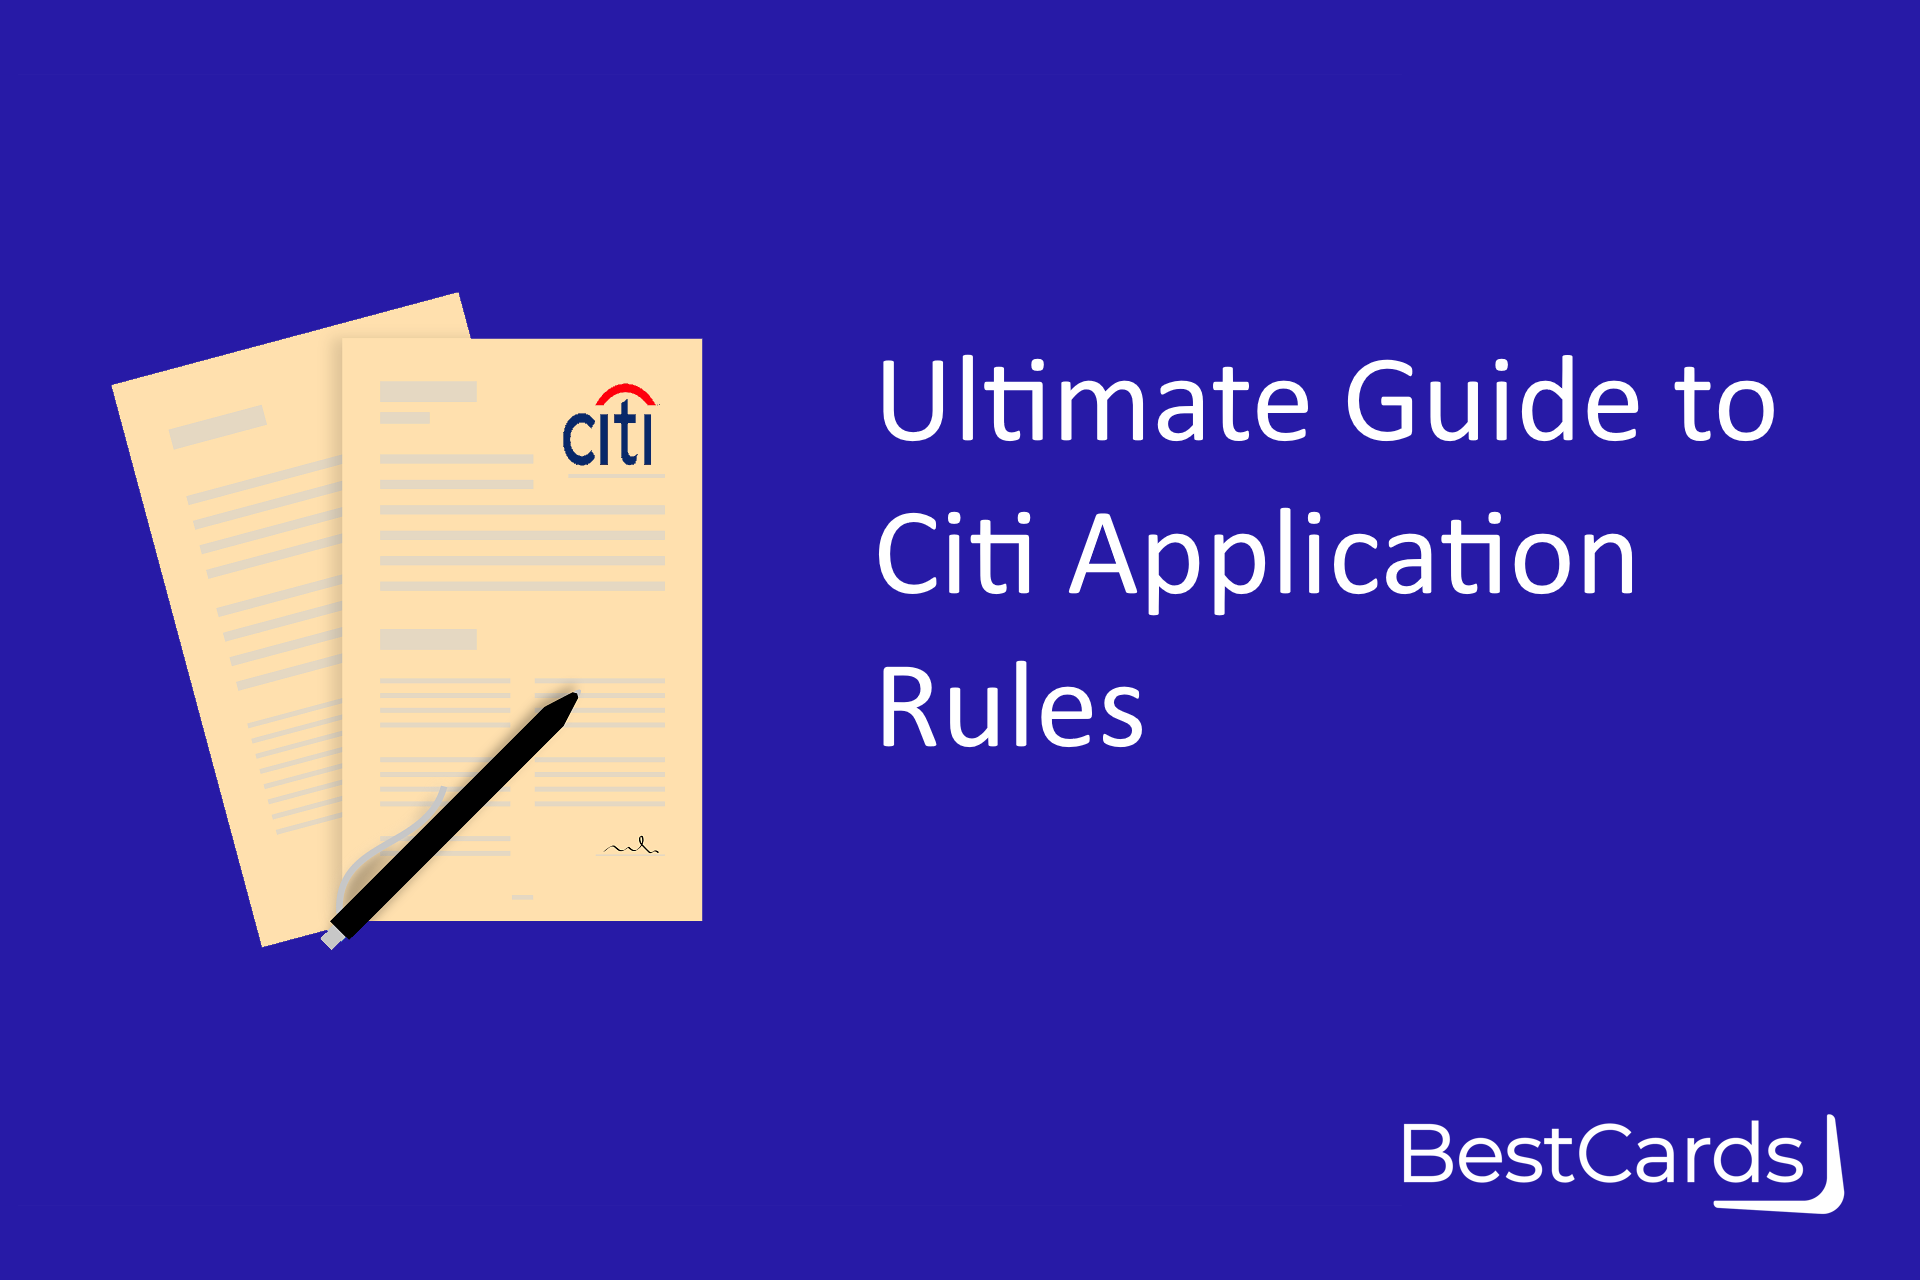 citi credit card application rules and guide